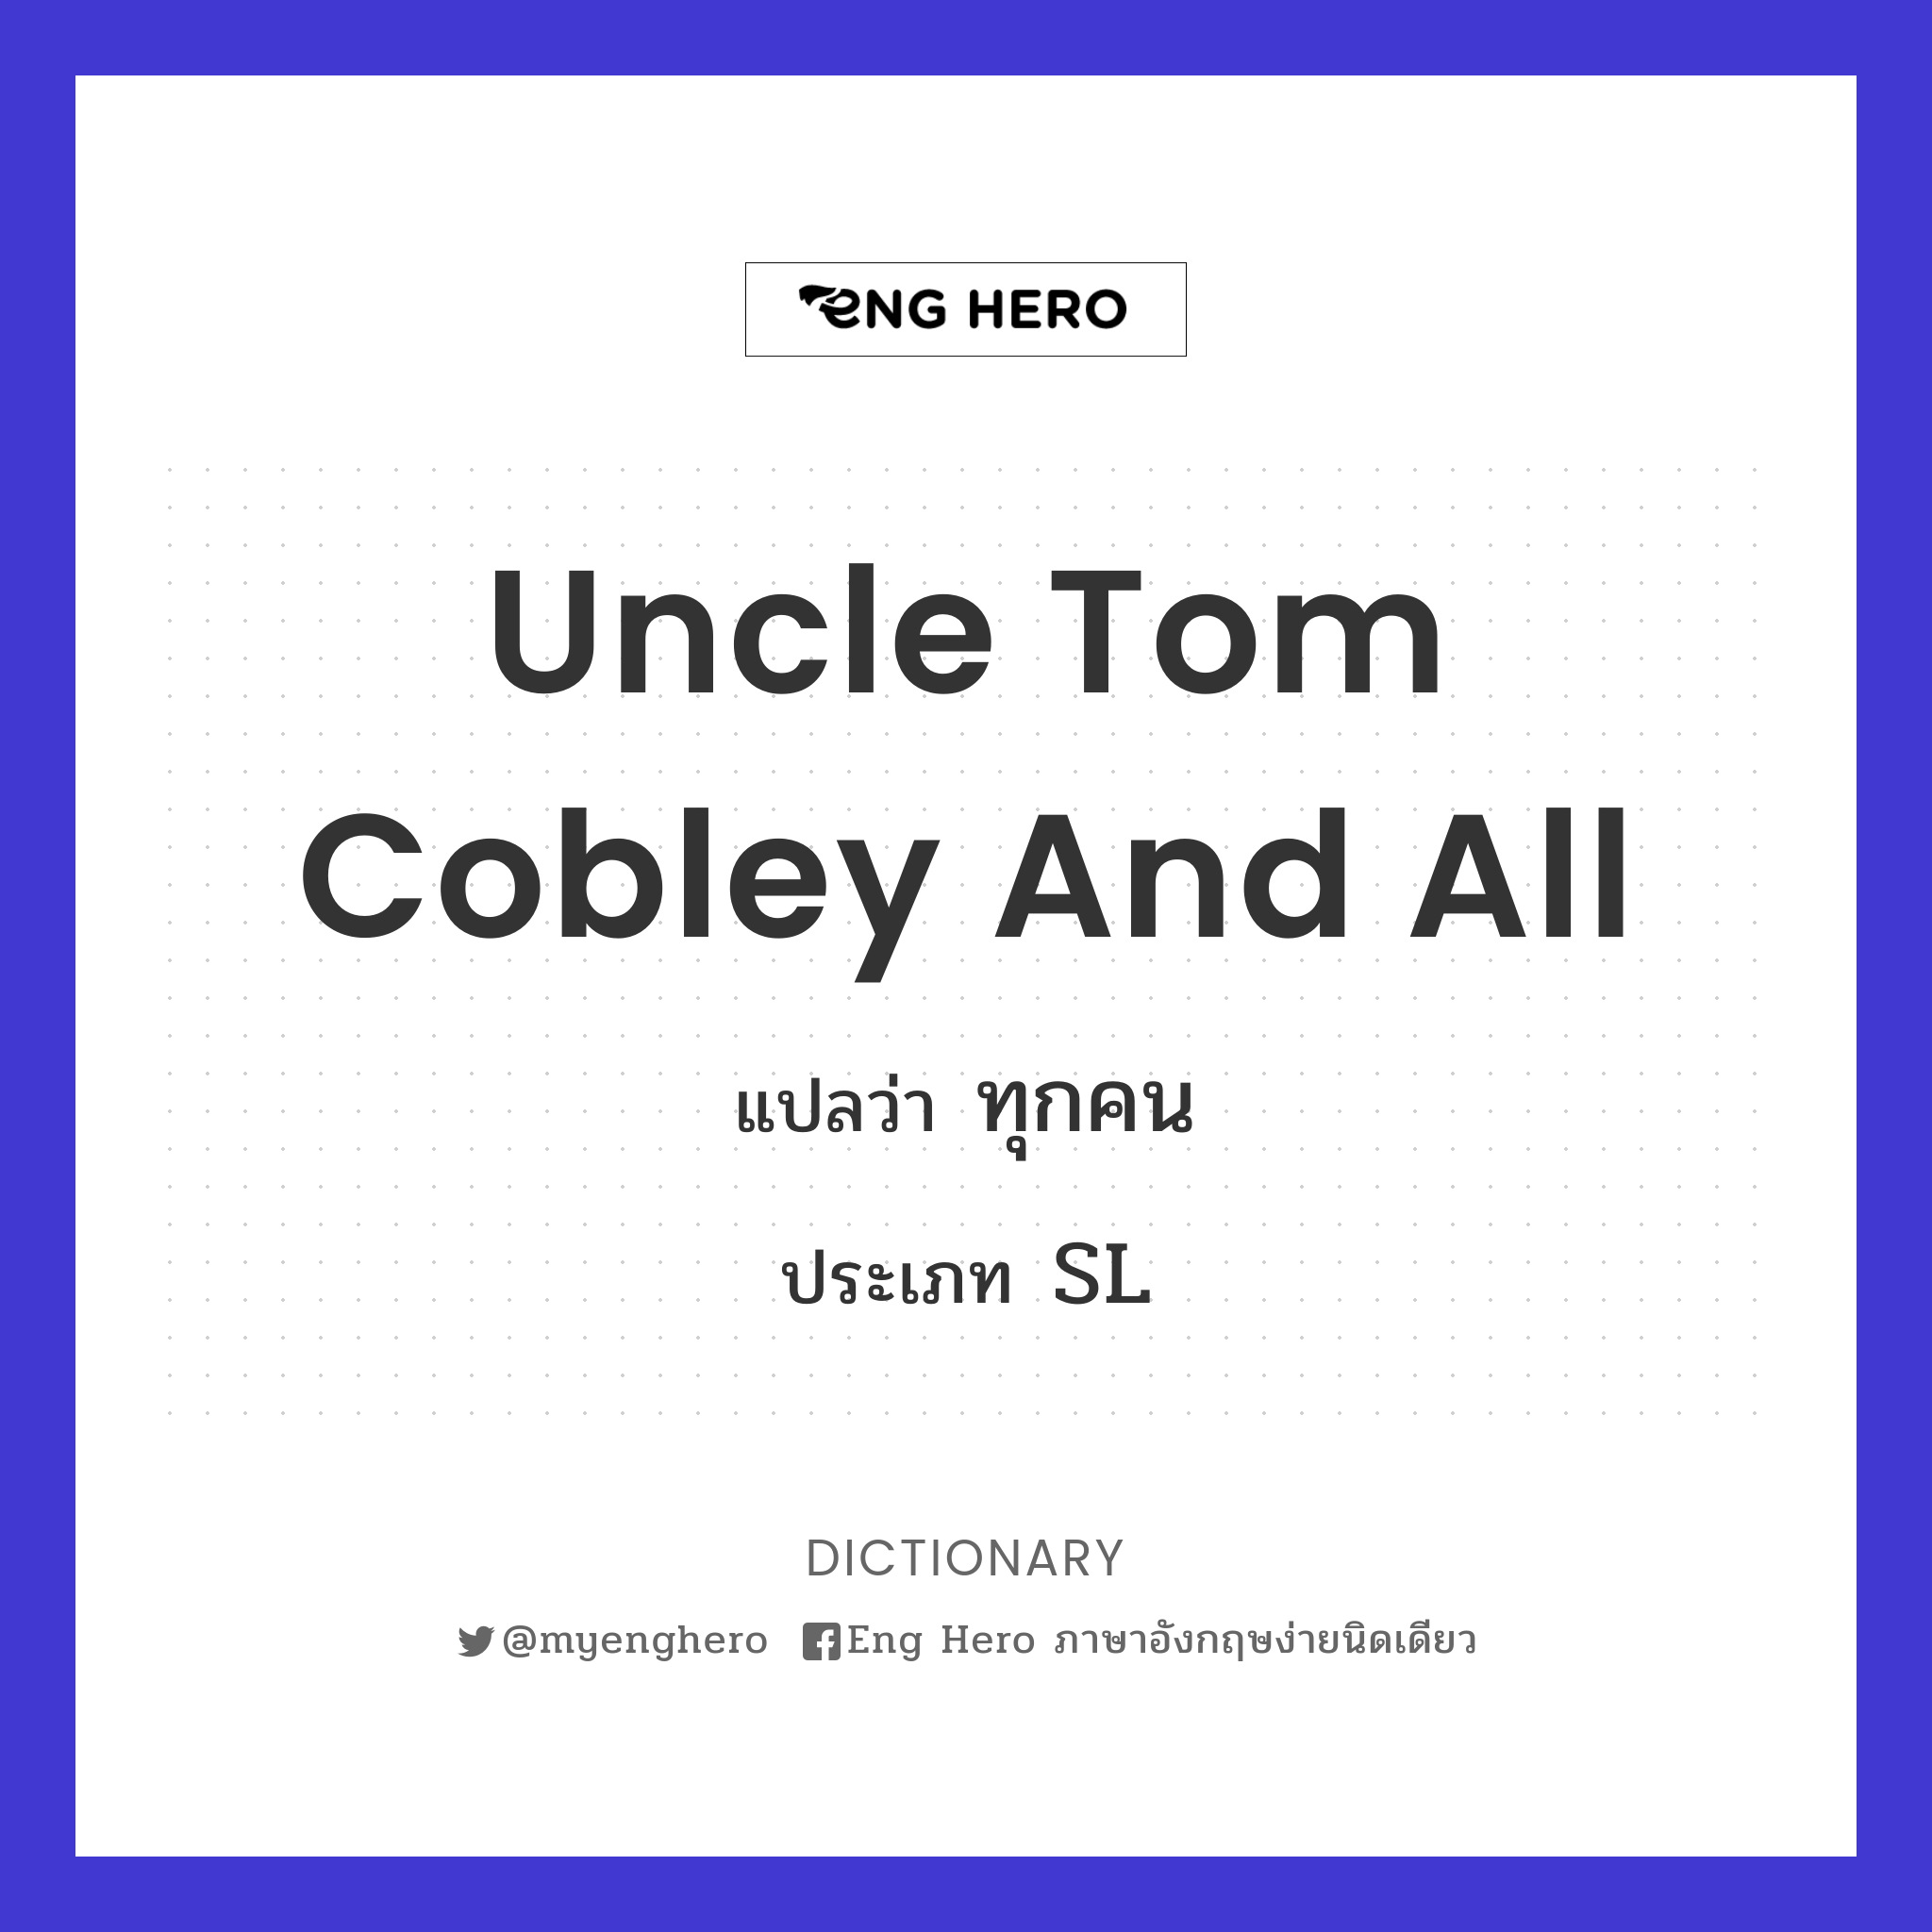 Uncle Tom Cobley and all